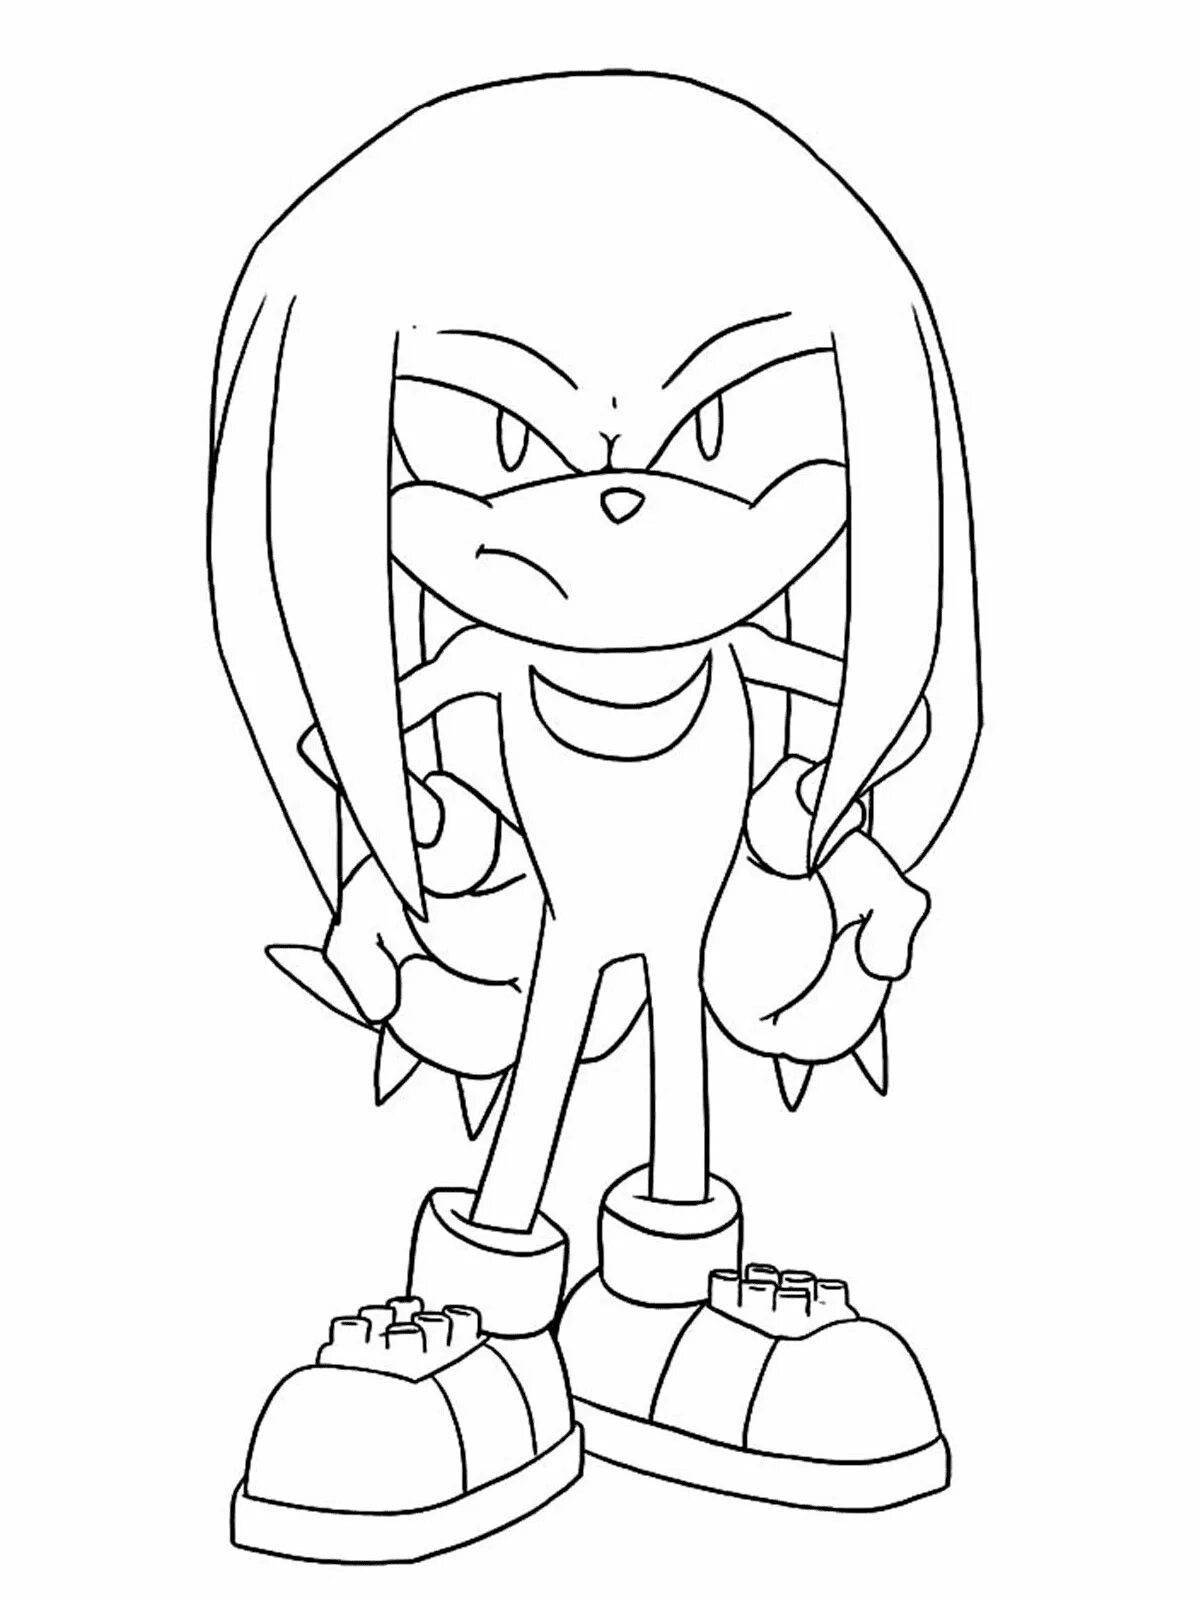 Colouring cute echidna knuckles